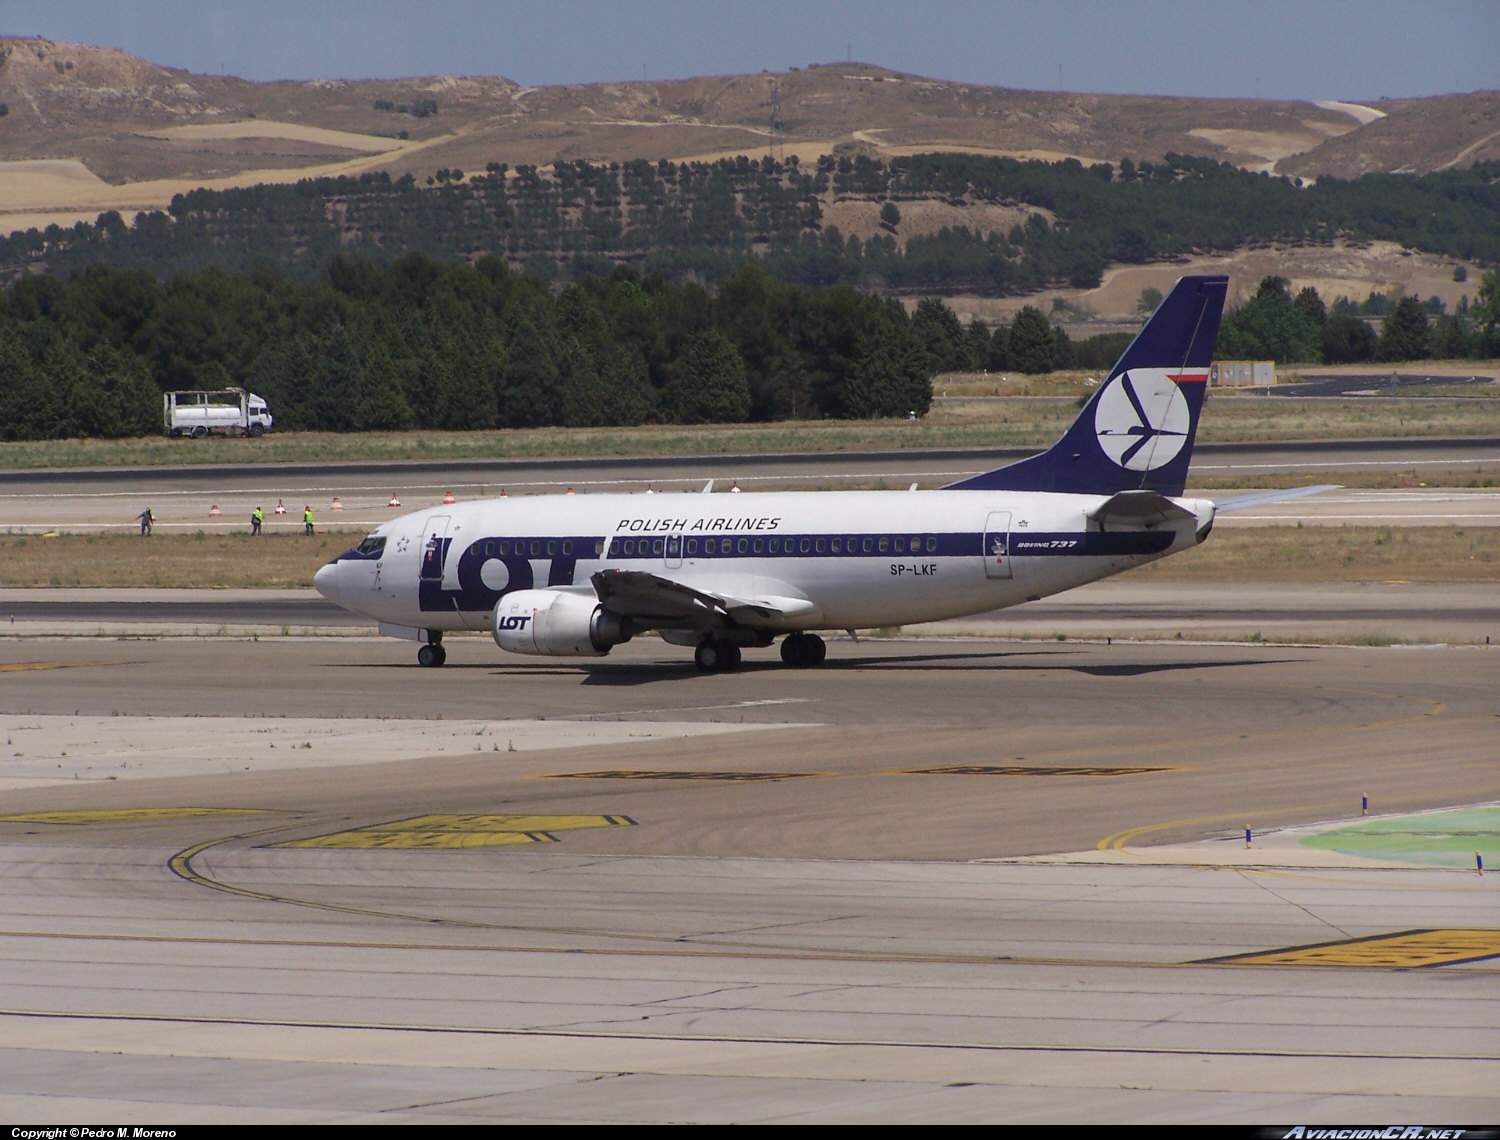 SP-LKF - Boeing 737-500 - LOT Polish Airlines